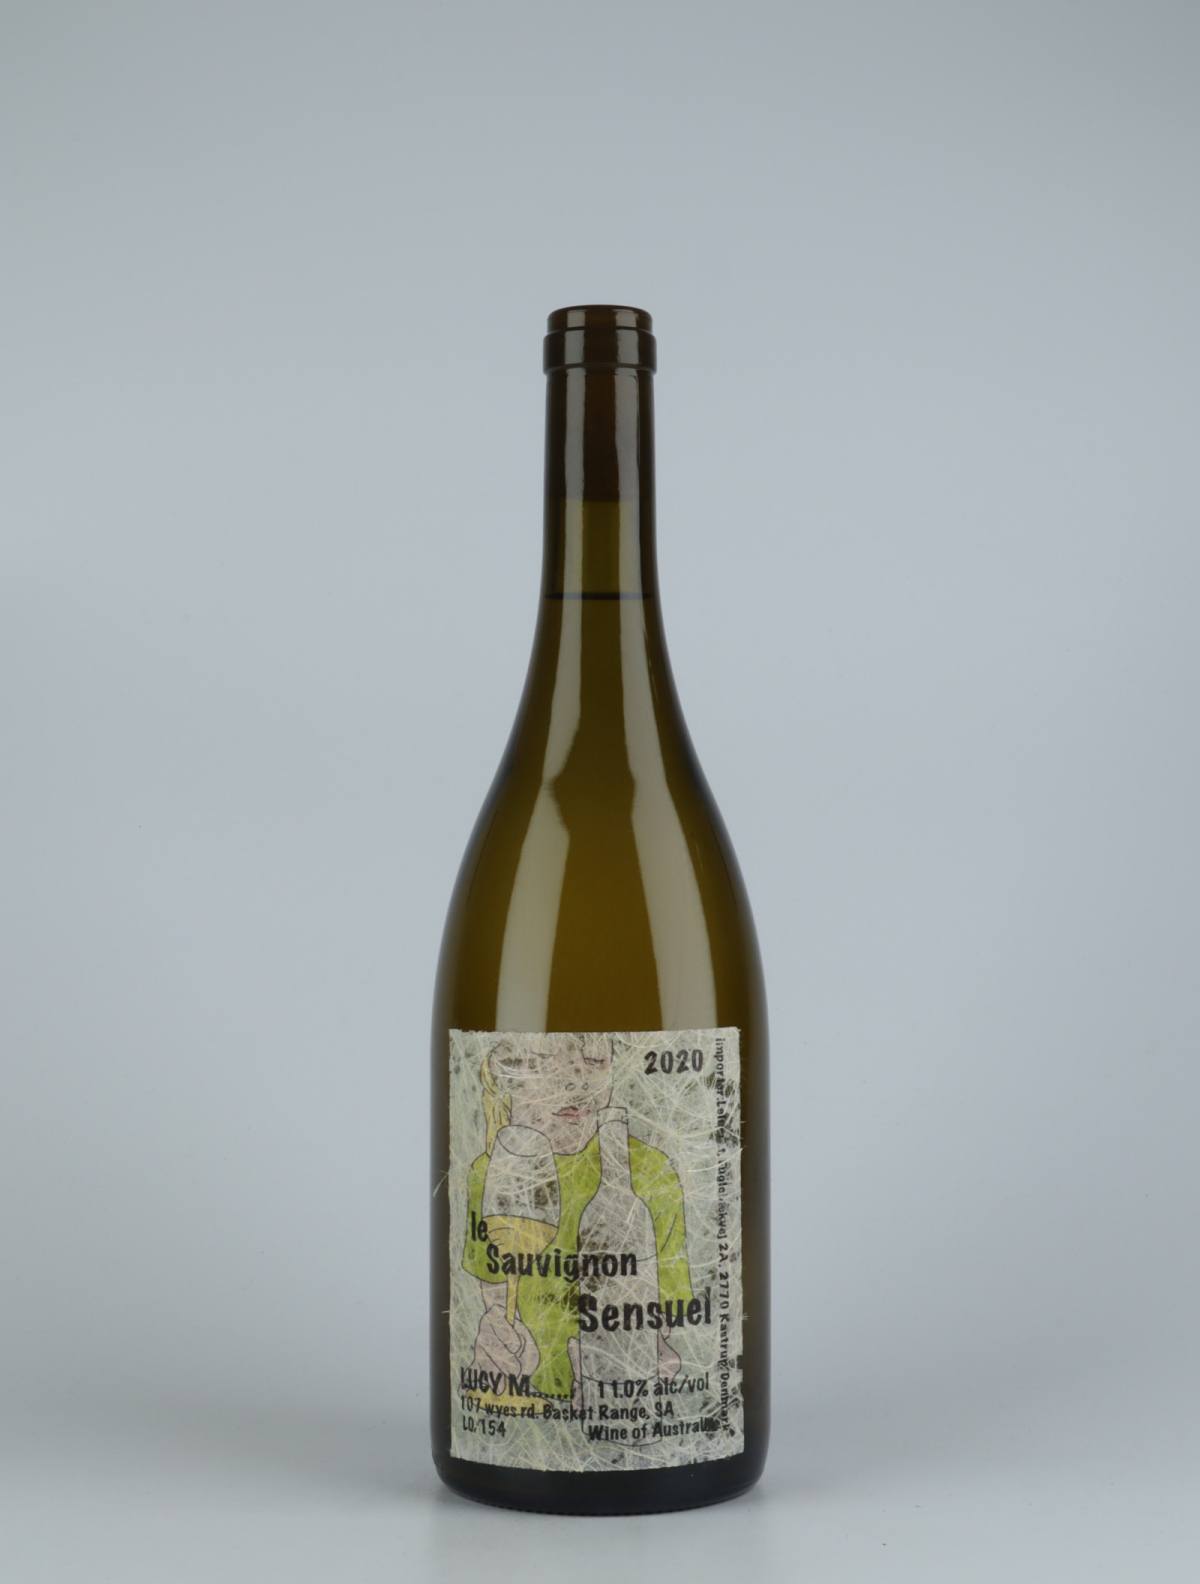 A bottle 2020 Le Sauvignon Sensuel White wine from Lucy Margaux, Adelaide Hills in Australia